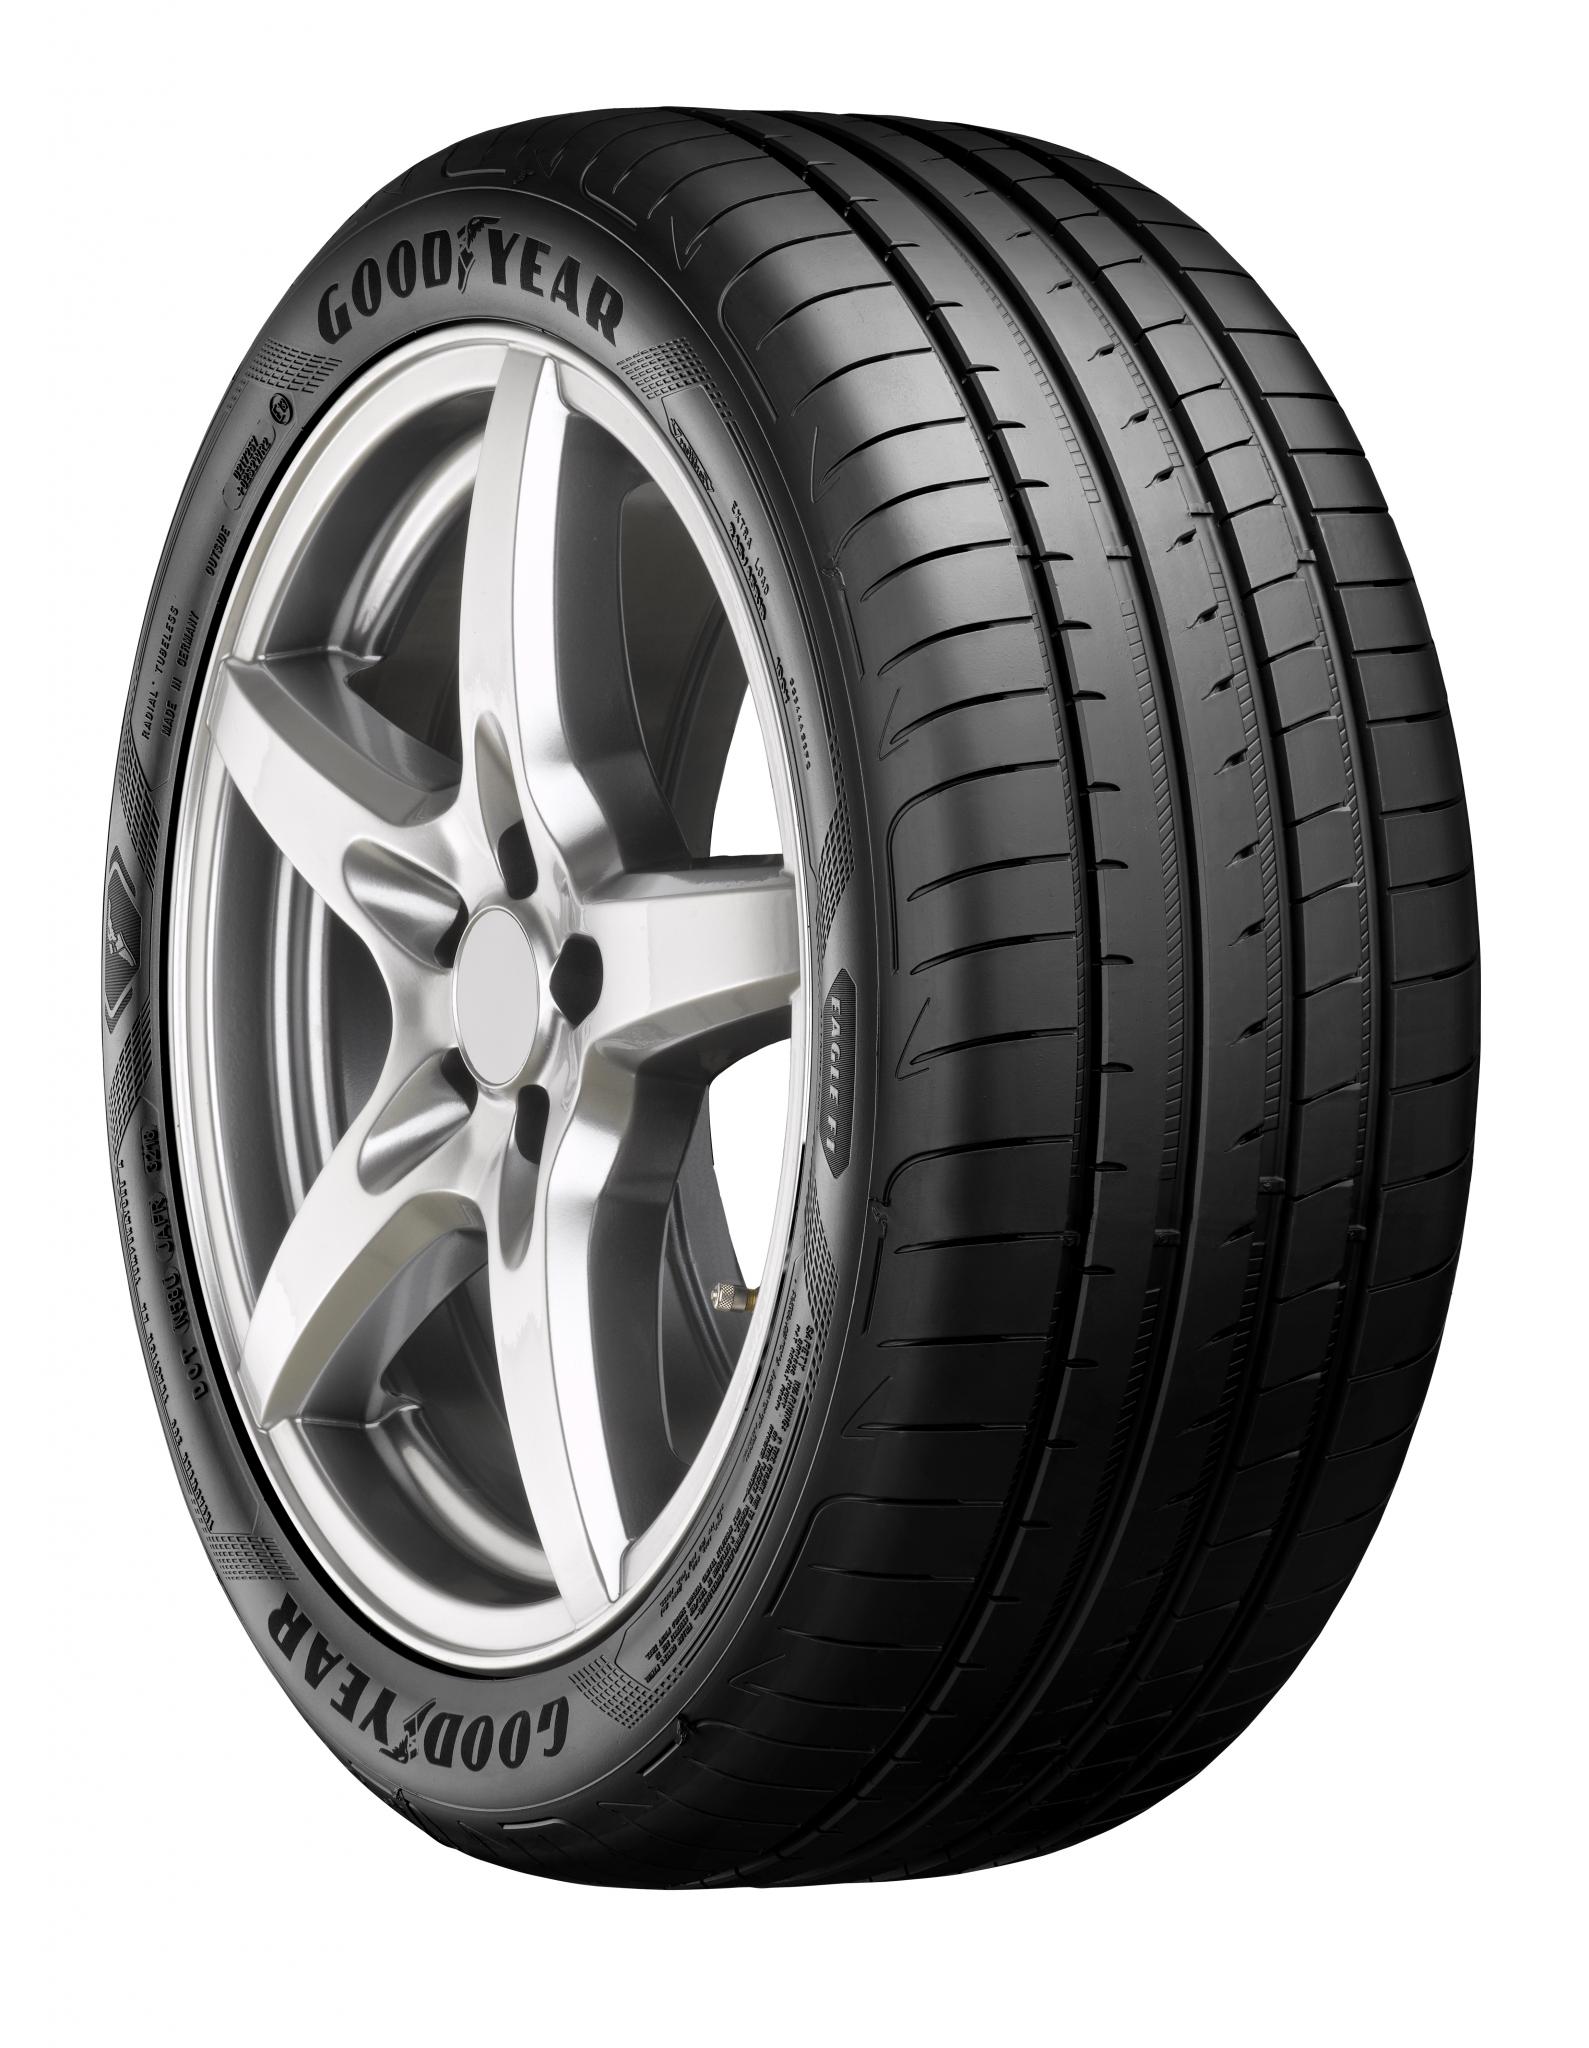 Goodyear Eagle F1 Asymmetric Tyre Reviews and Tests